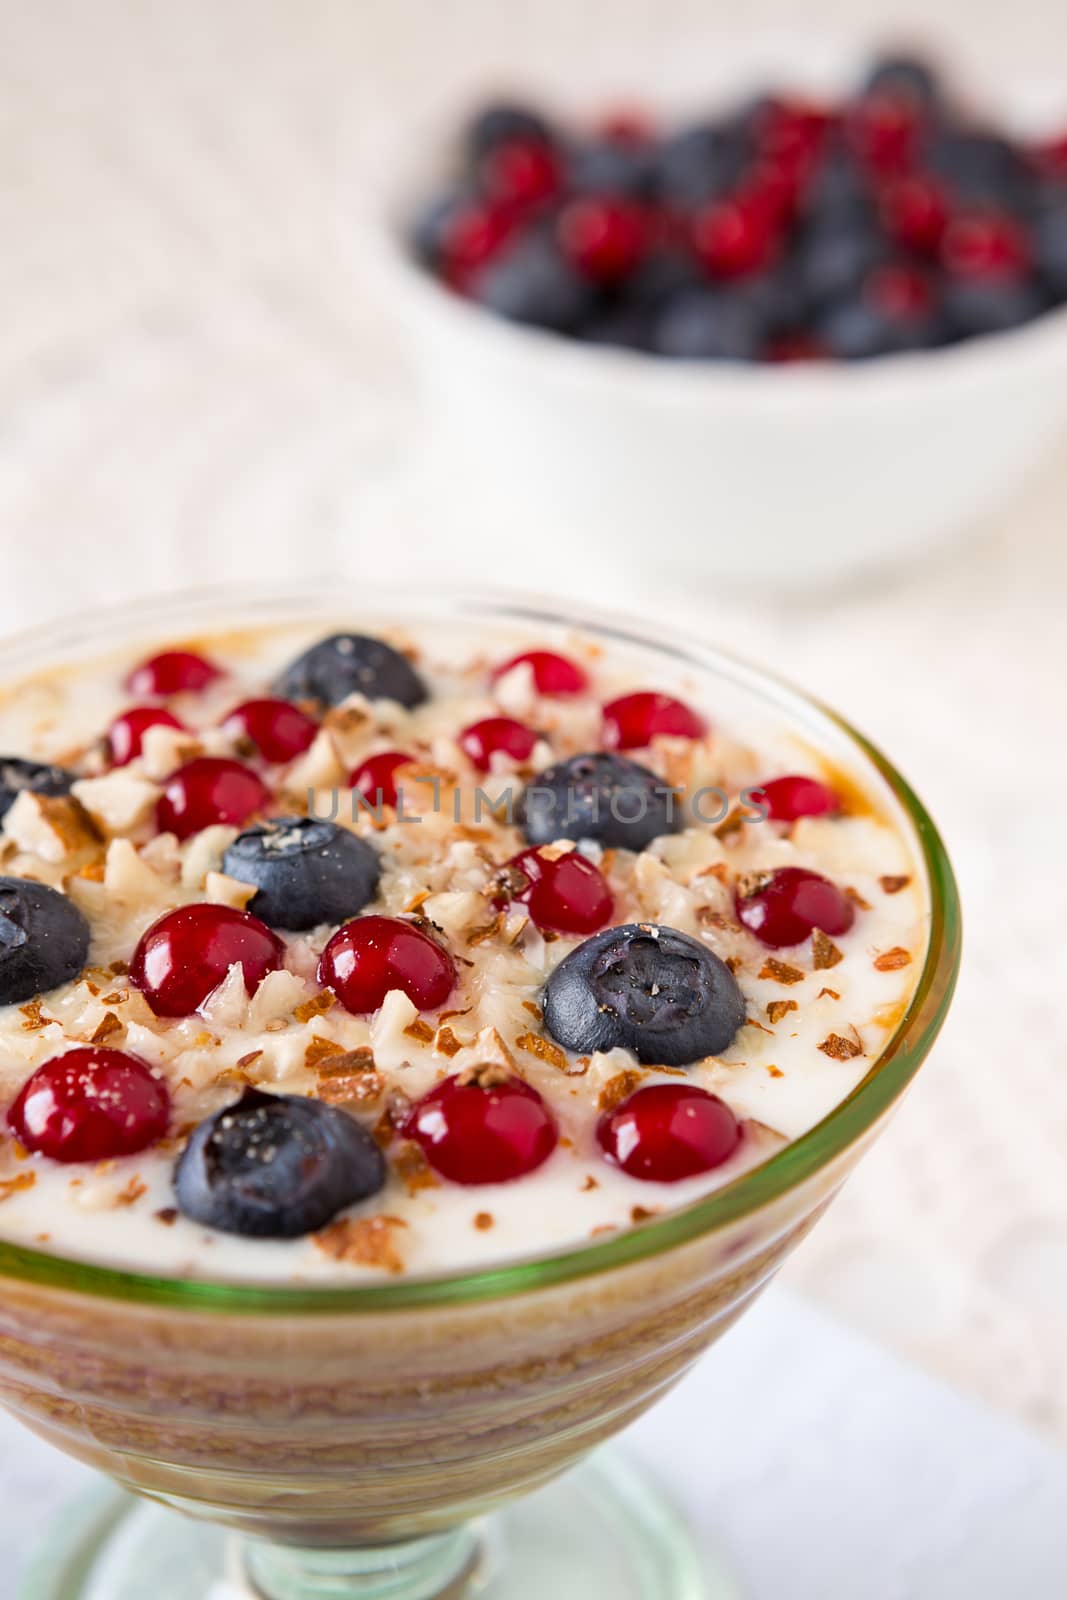 Closeup of a yogurt dessert with berries and almonds with berries on background